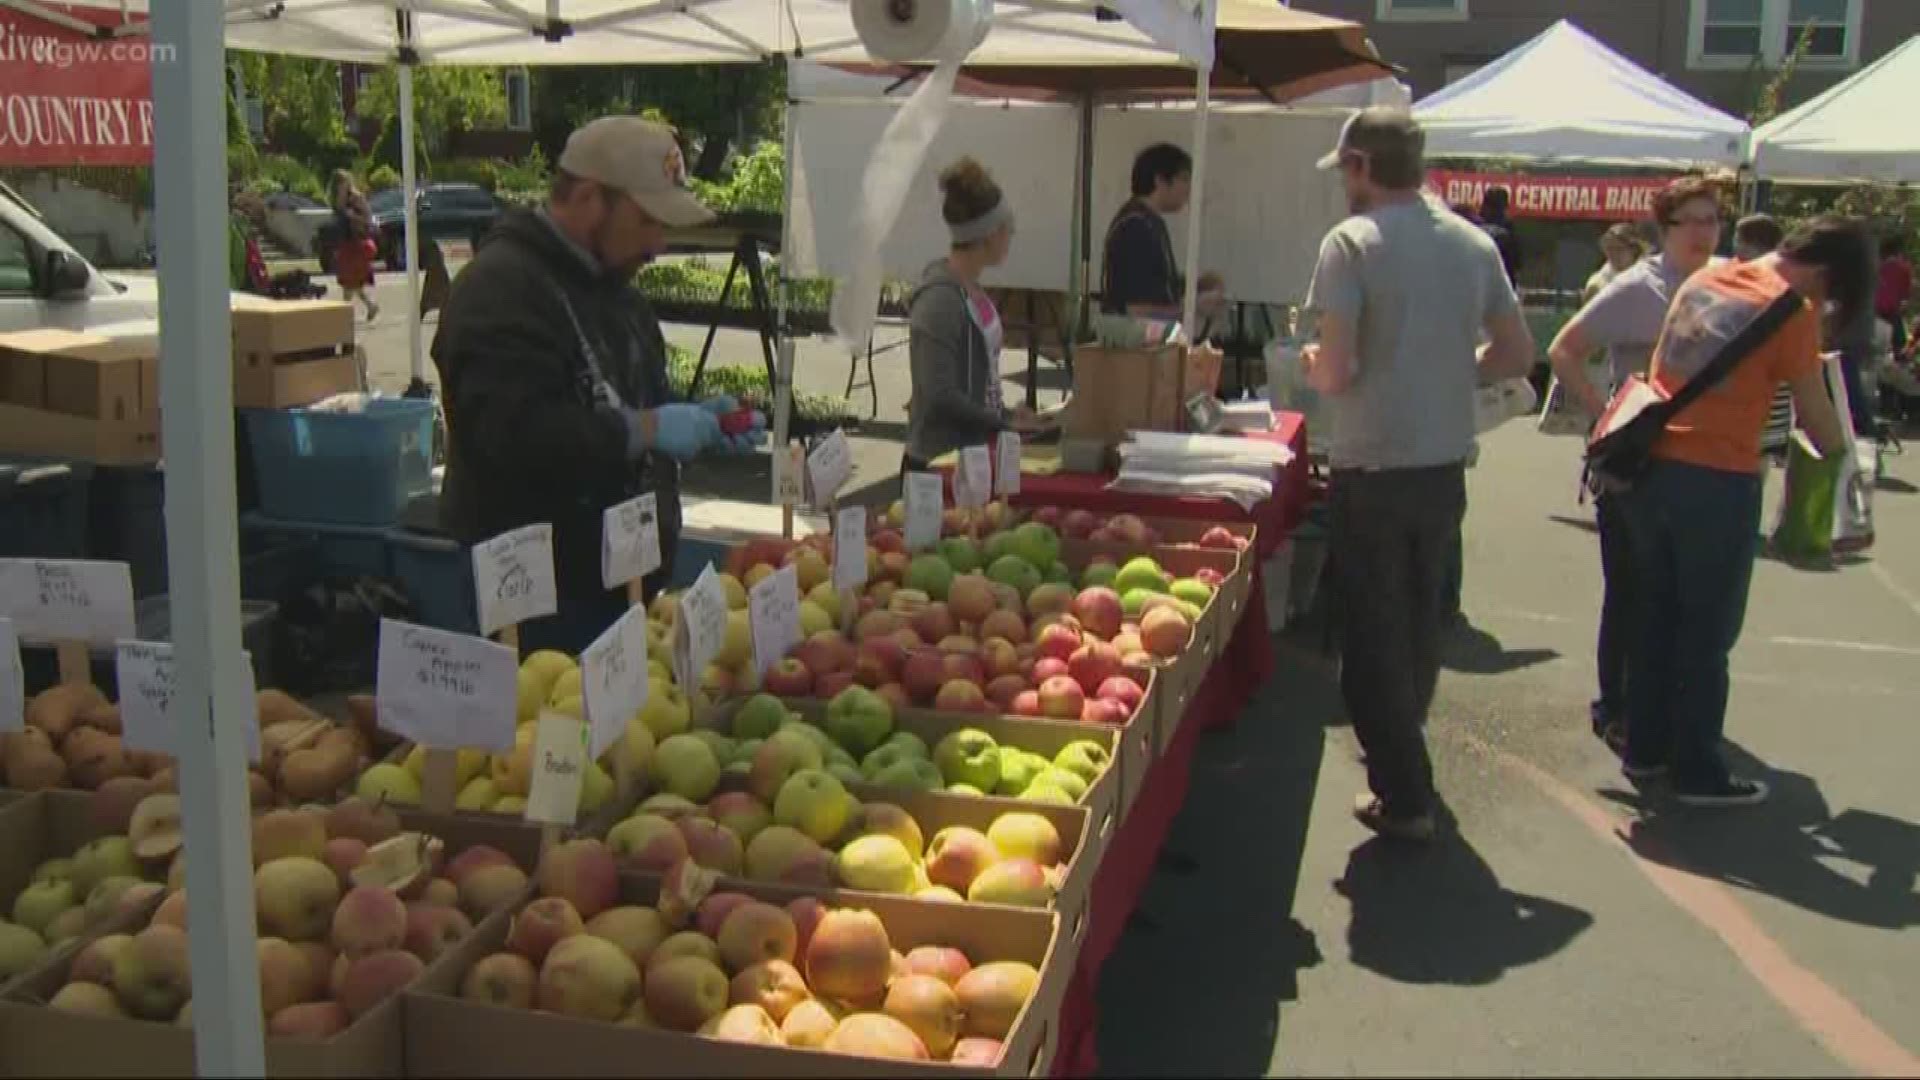 The Portland Farmers Market opens this weekend. Here’s how it will look different this year.